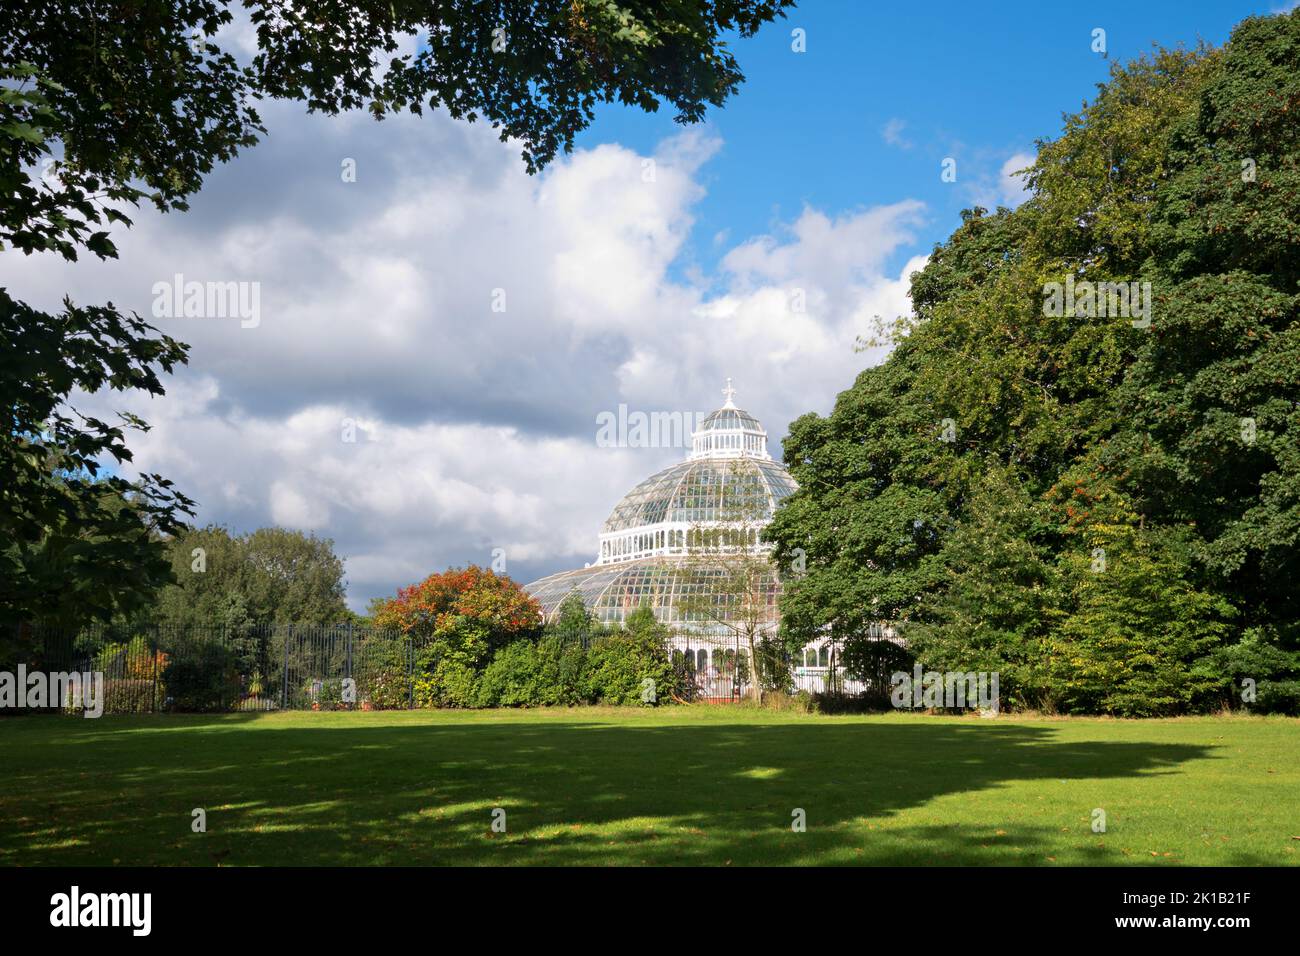 The Palm House a Grade II listed building in Sefton Park Liverpool UK Stock Photo